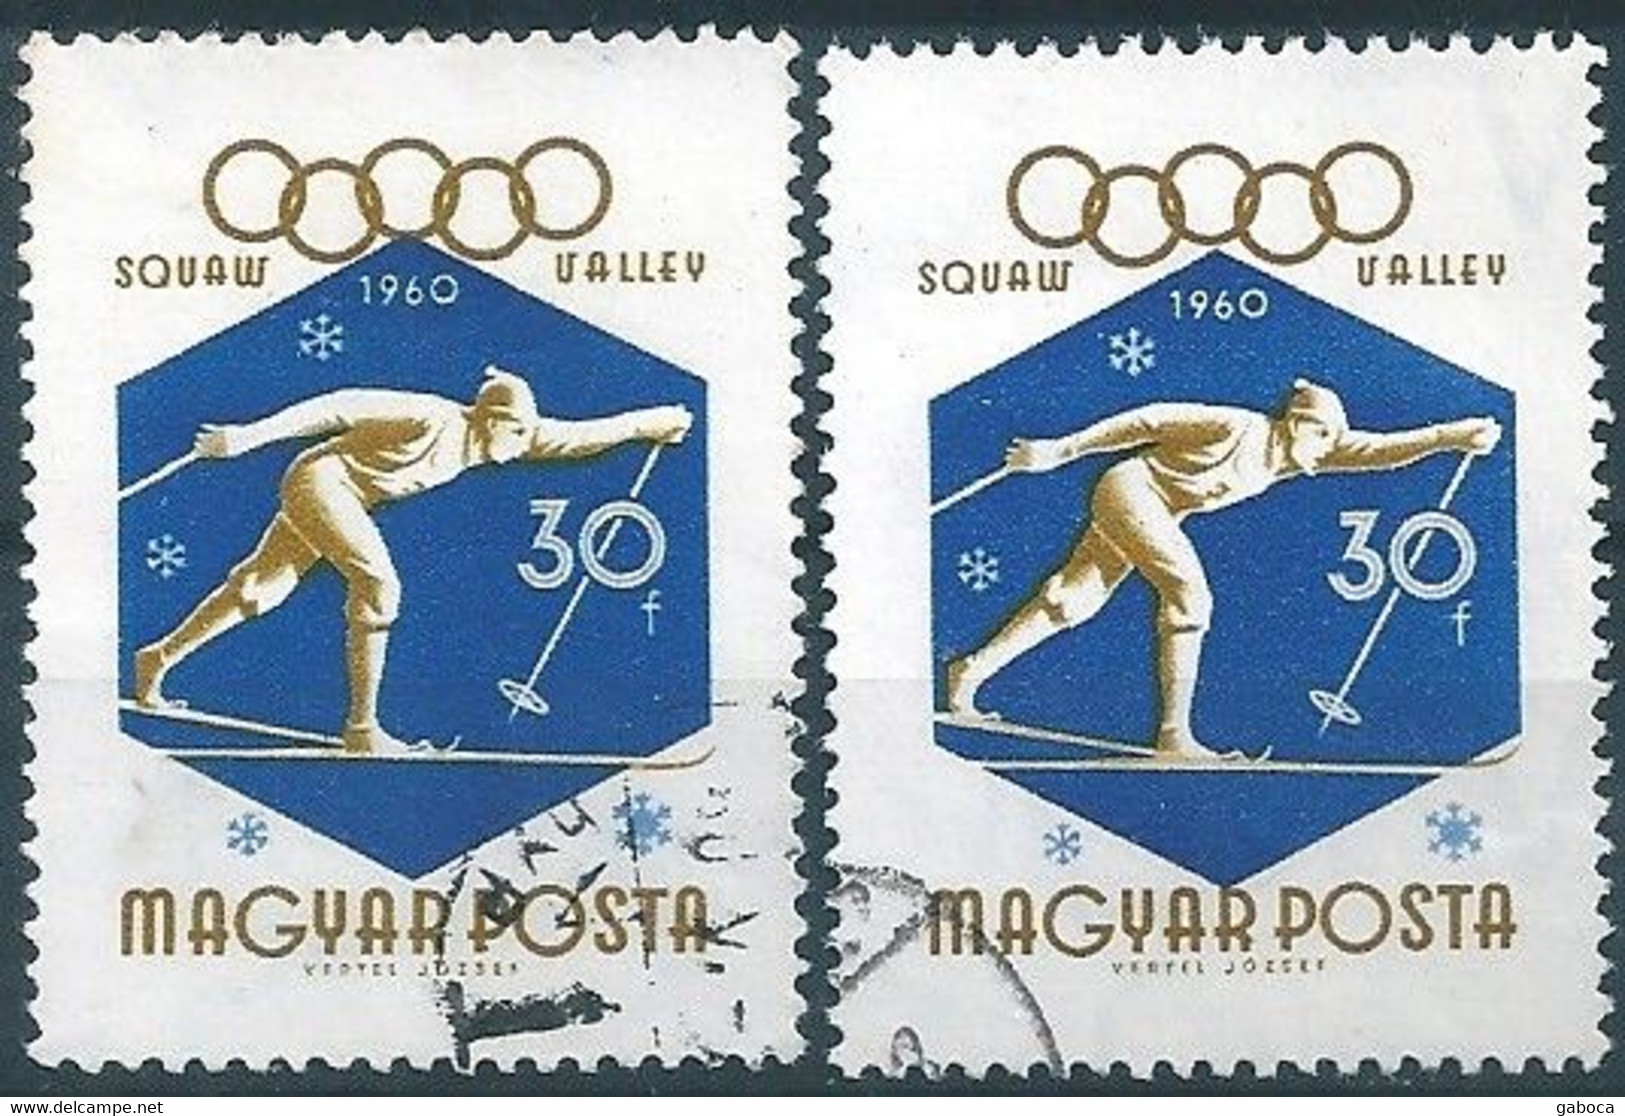 C1003 Hungary Winter Olympic Squaw Valley Sport Skiing Used ERROR - Hiver 1960: Squaw Valley